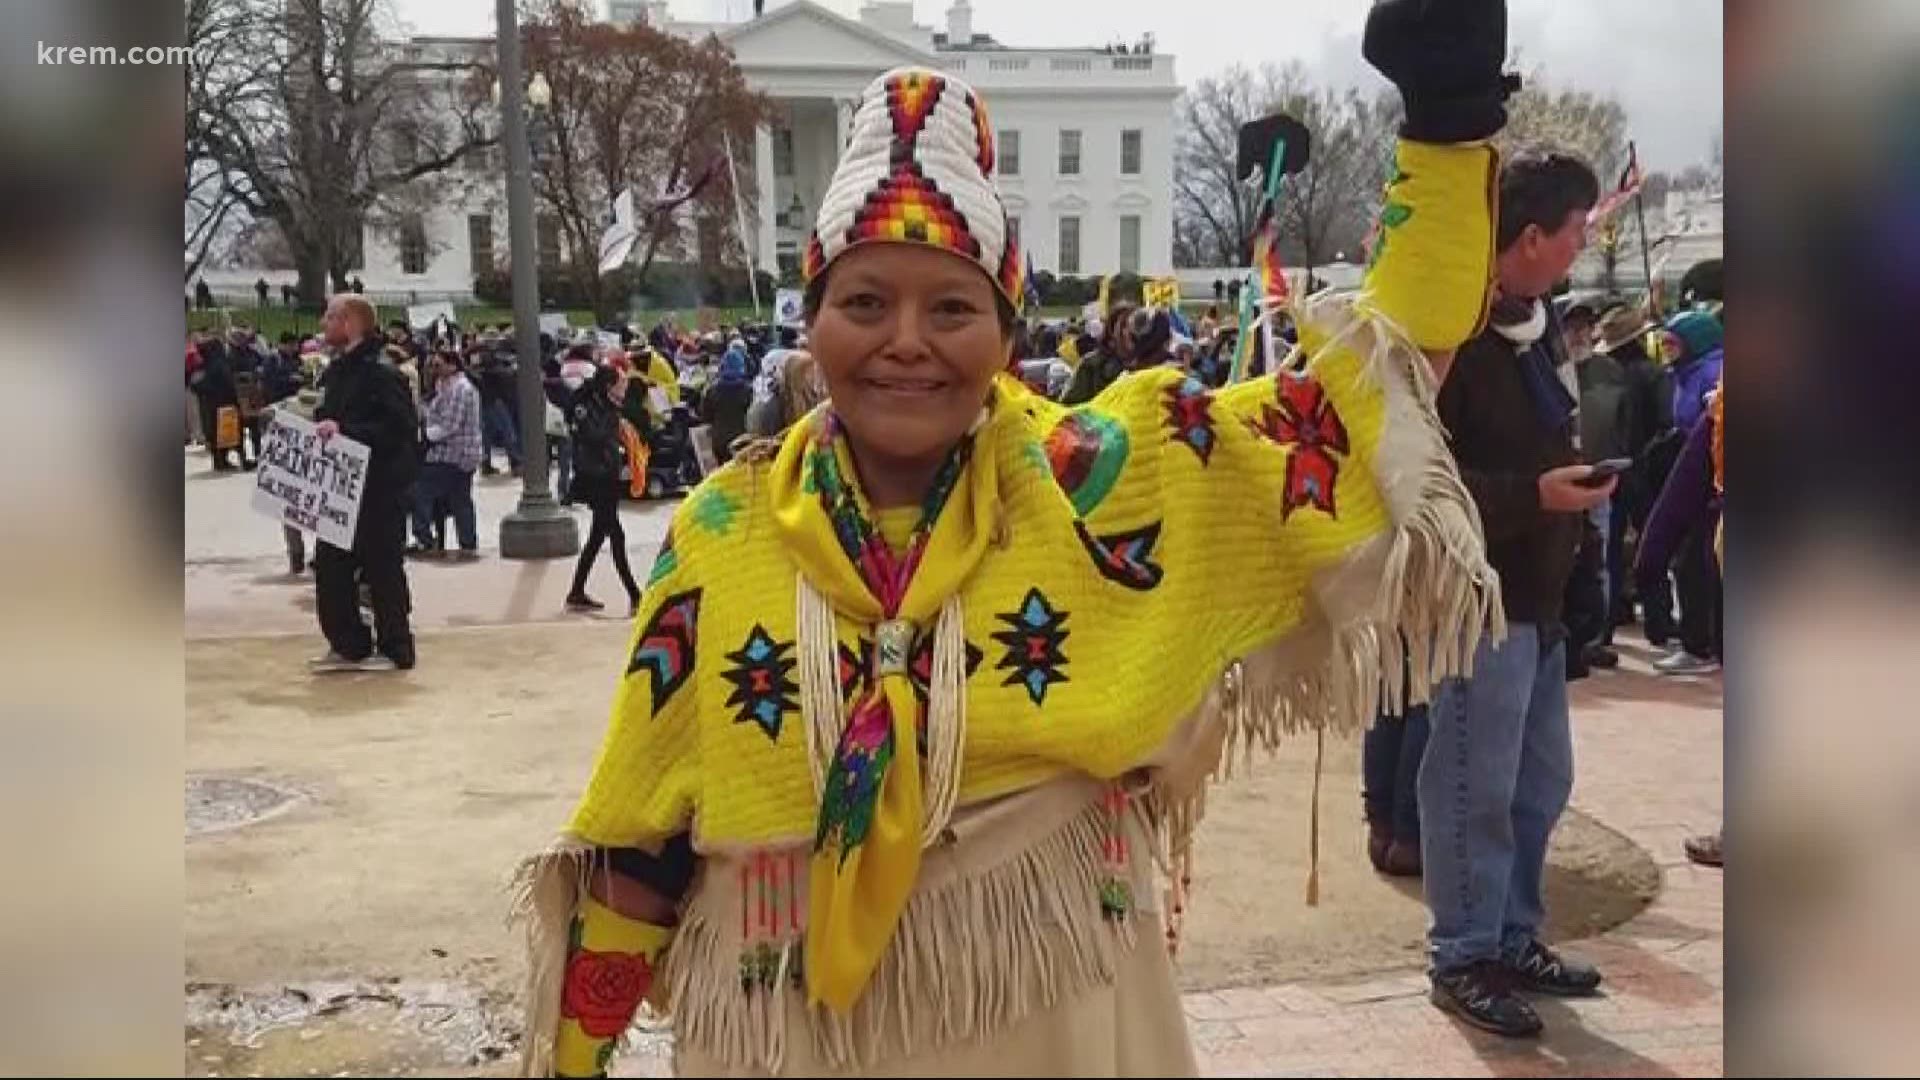 She dedicated her life to making the world a better place, Tribe leaders said.